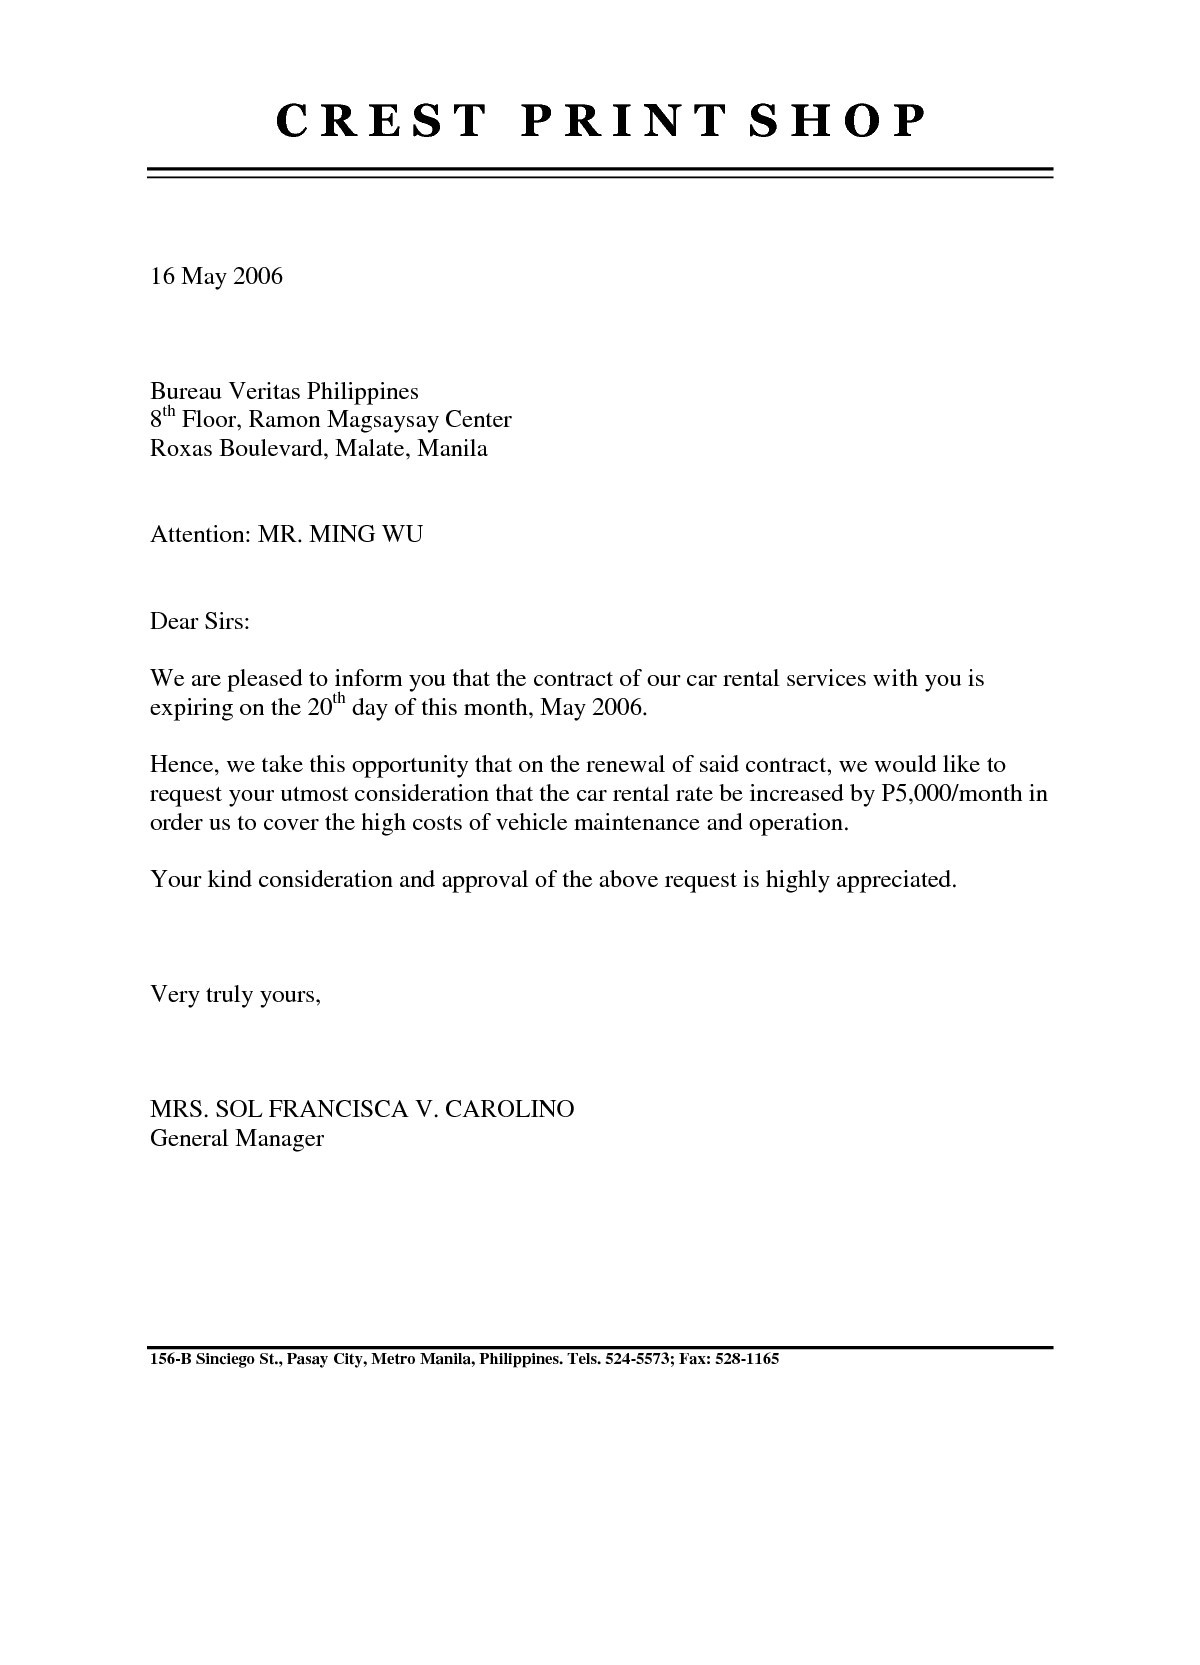 Nonrenewal Of Lease Letter Template Samples Letter Template Collection